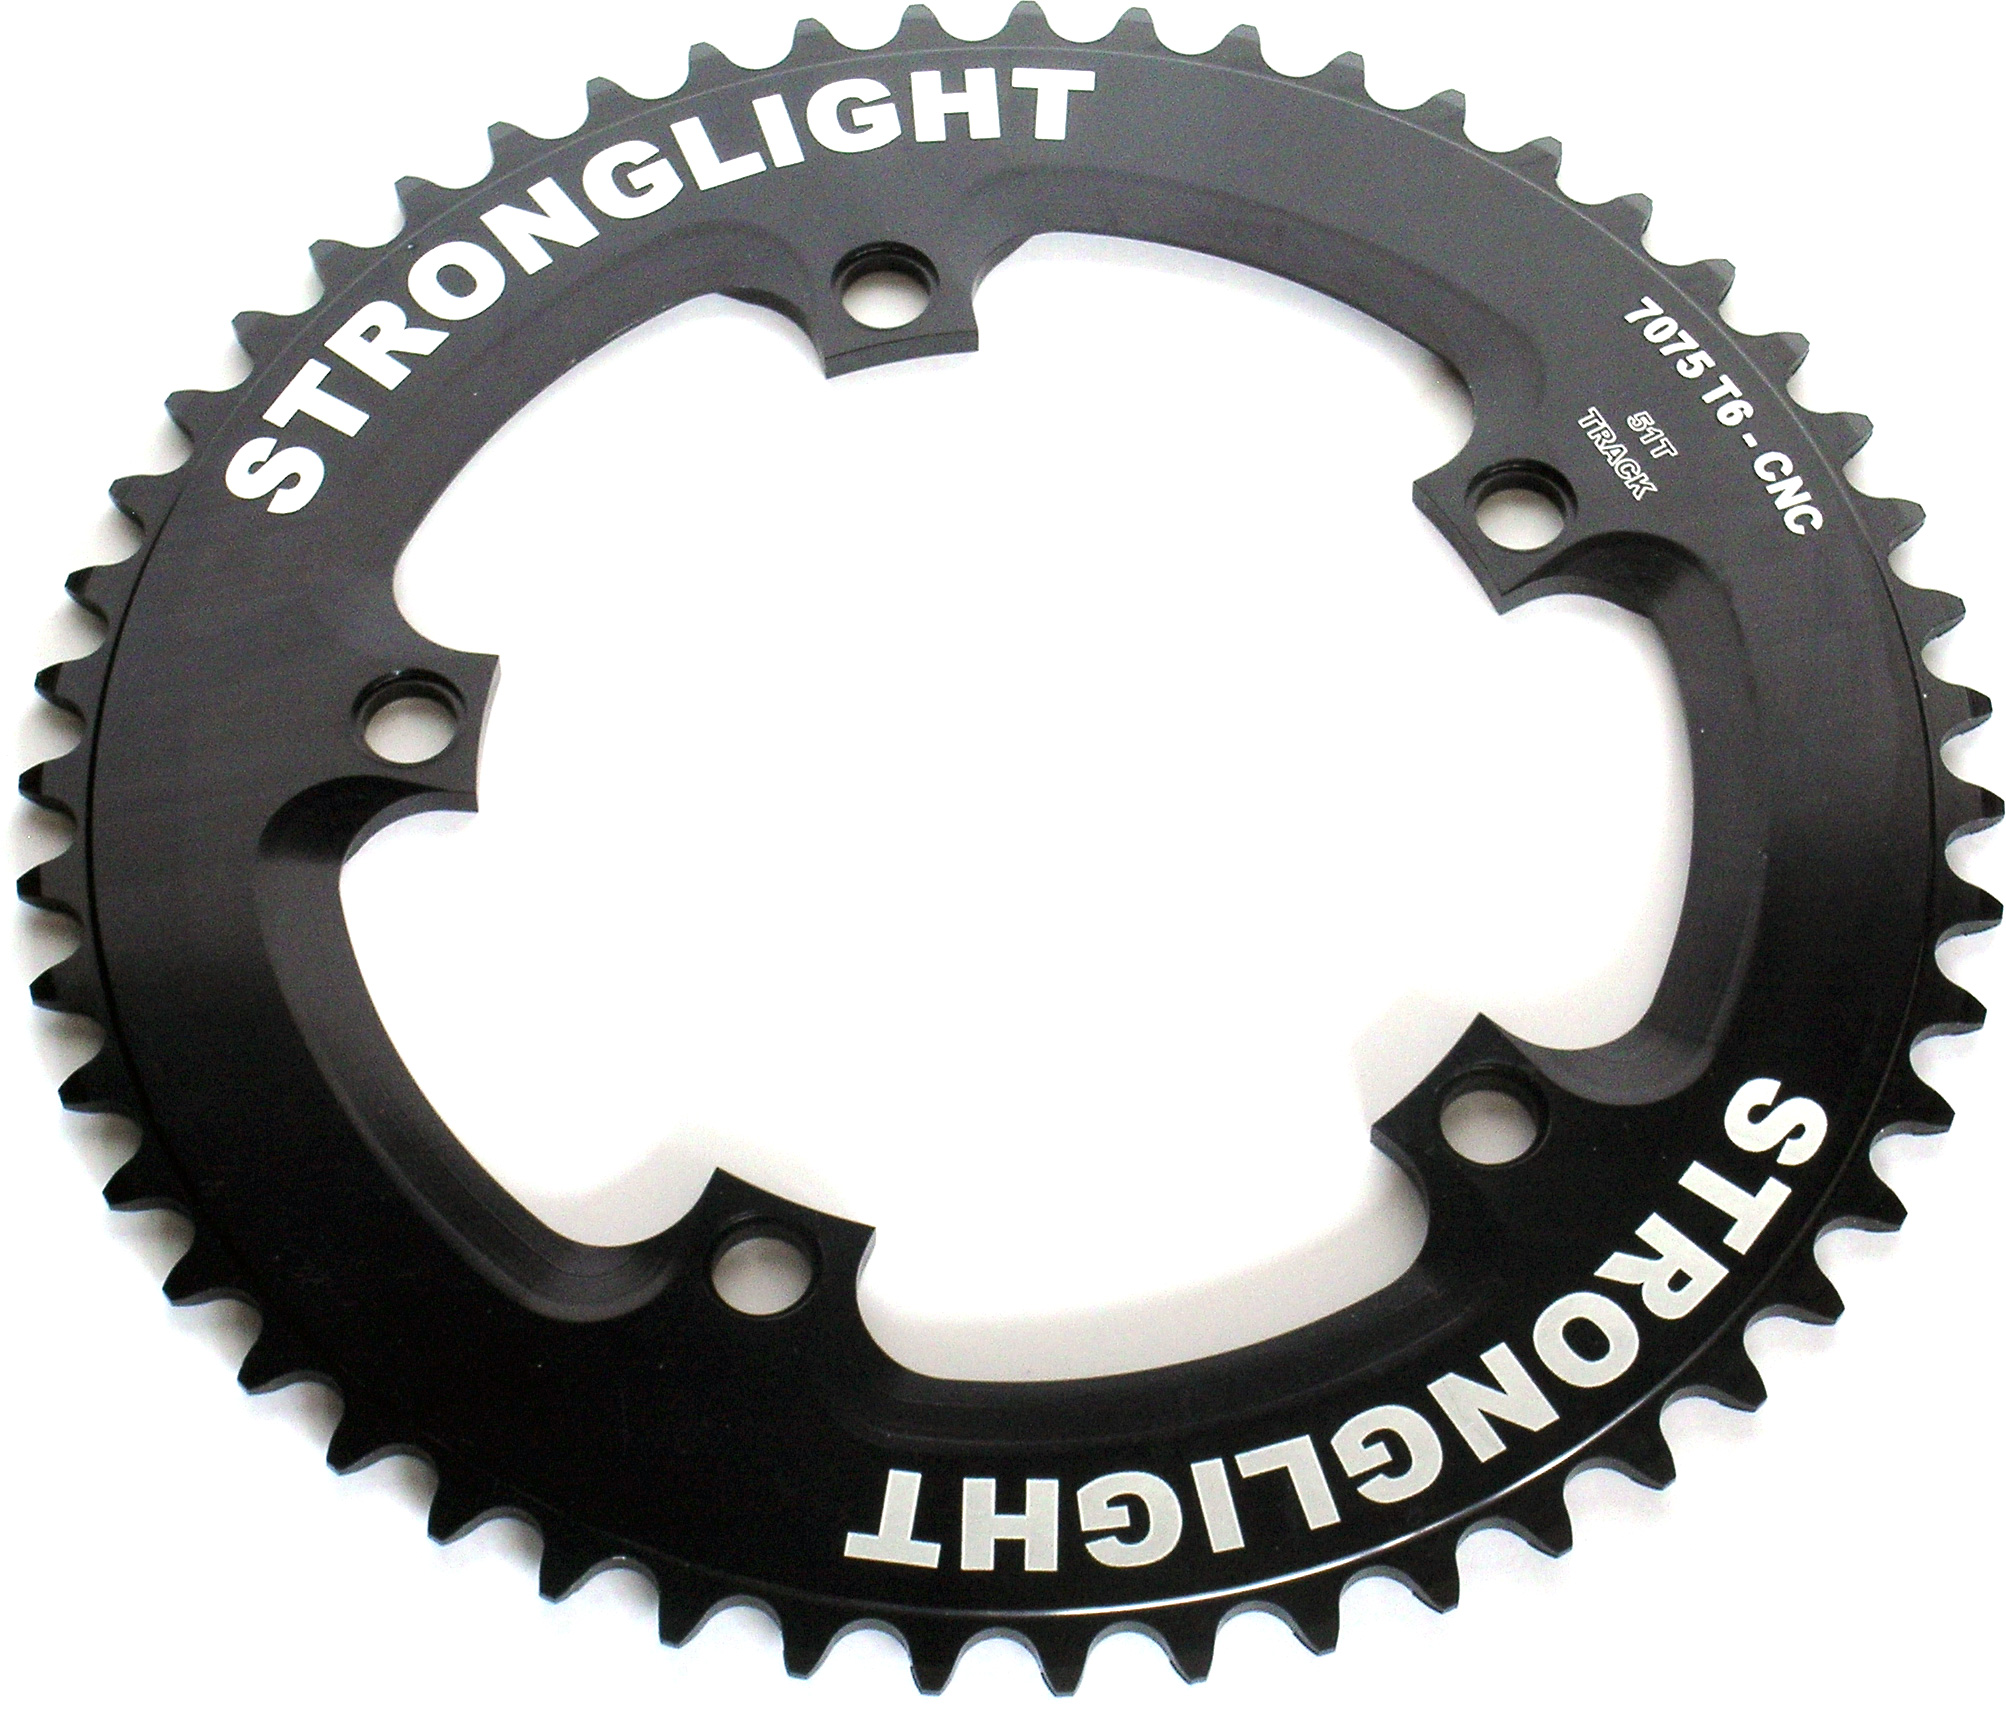 RT130Z49 Stronglight Black 49T 5-Arm/130mm Track Chainring